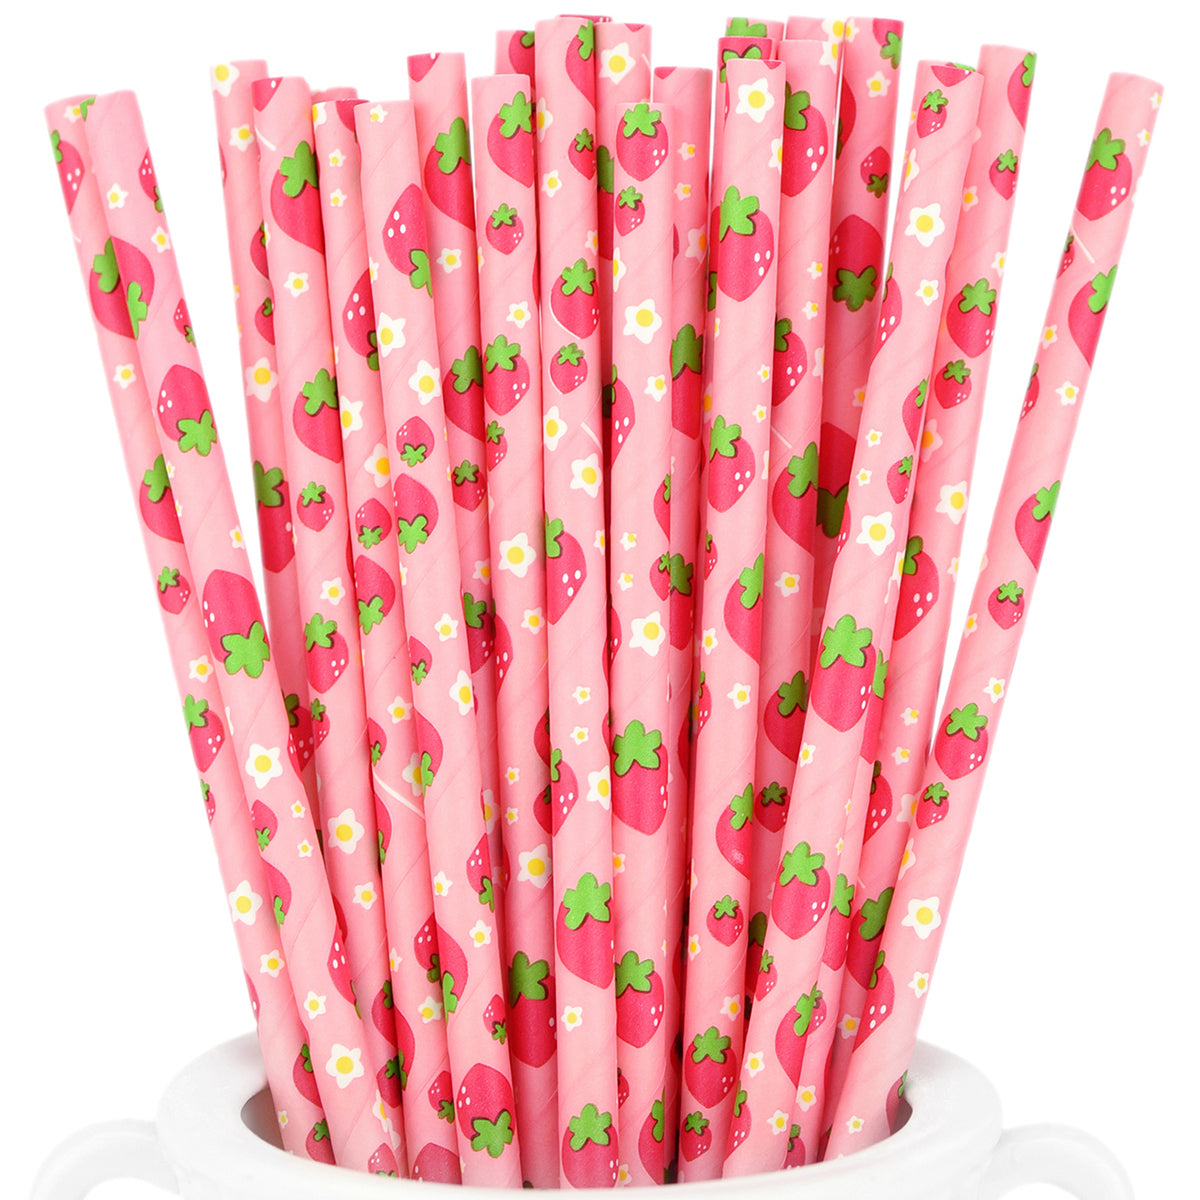 Sustainable Paper Straws Rings Pink 7.75 Inches 100 Count Box